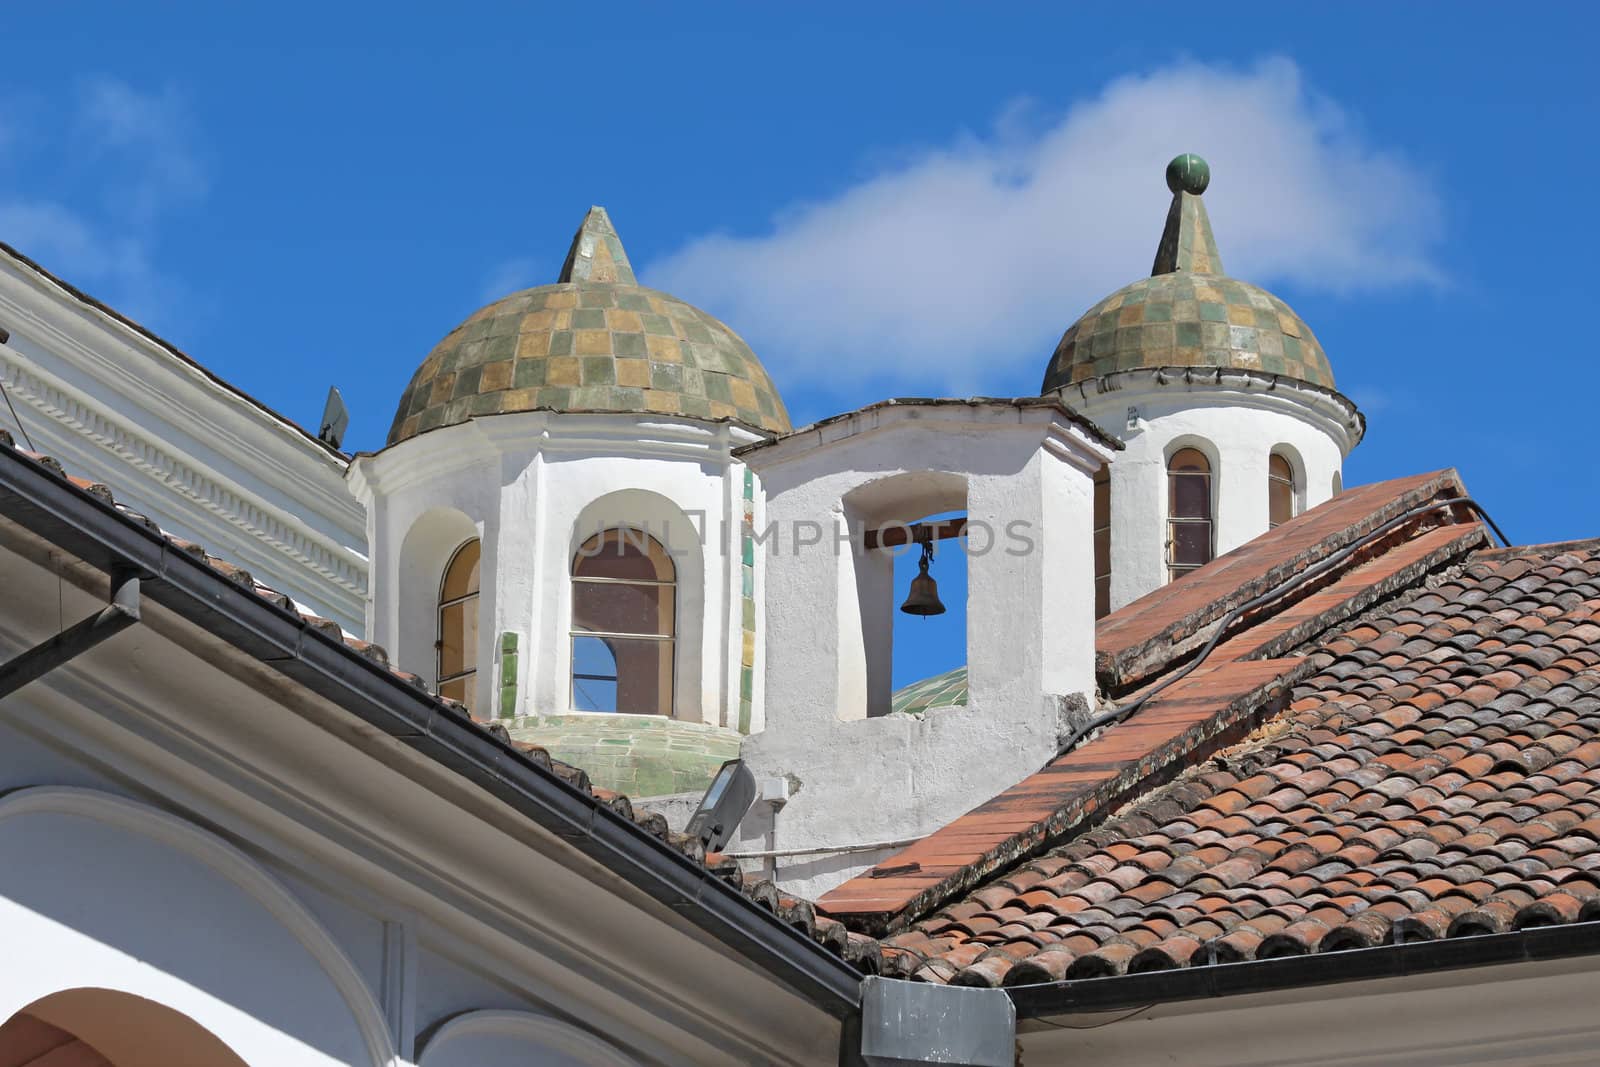 Close-up of domes and a bell from the courtyard of the church and monastery of San Francisco in Quito, Ecuador